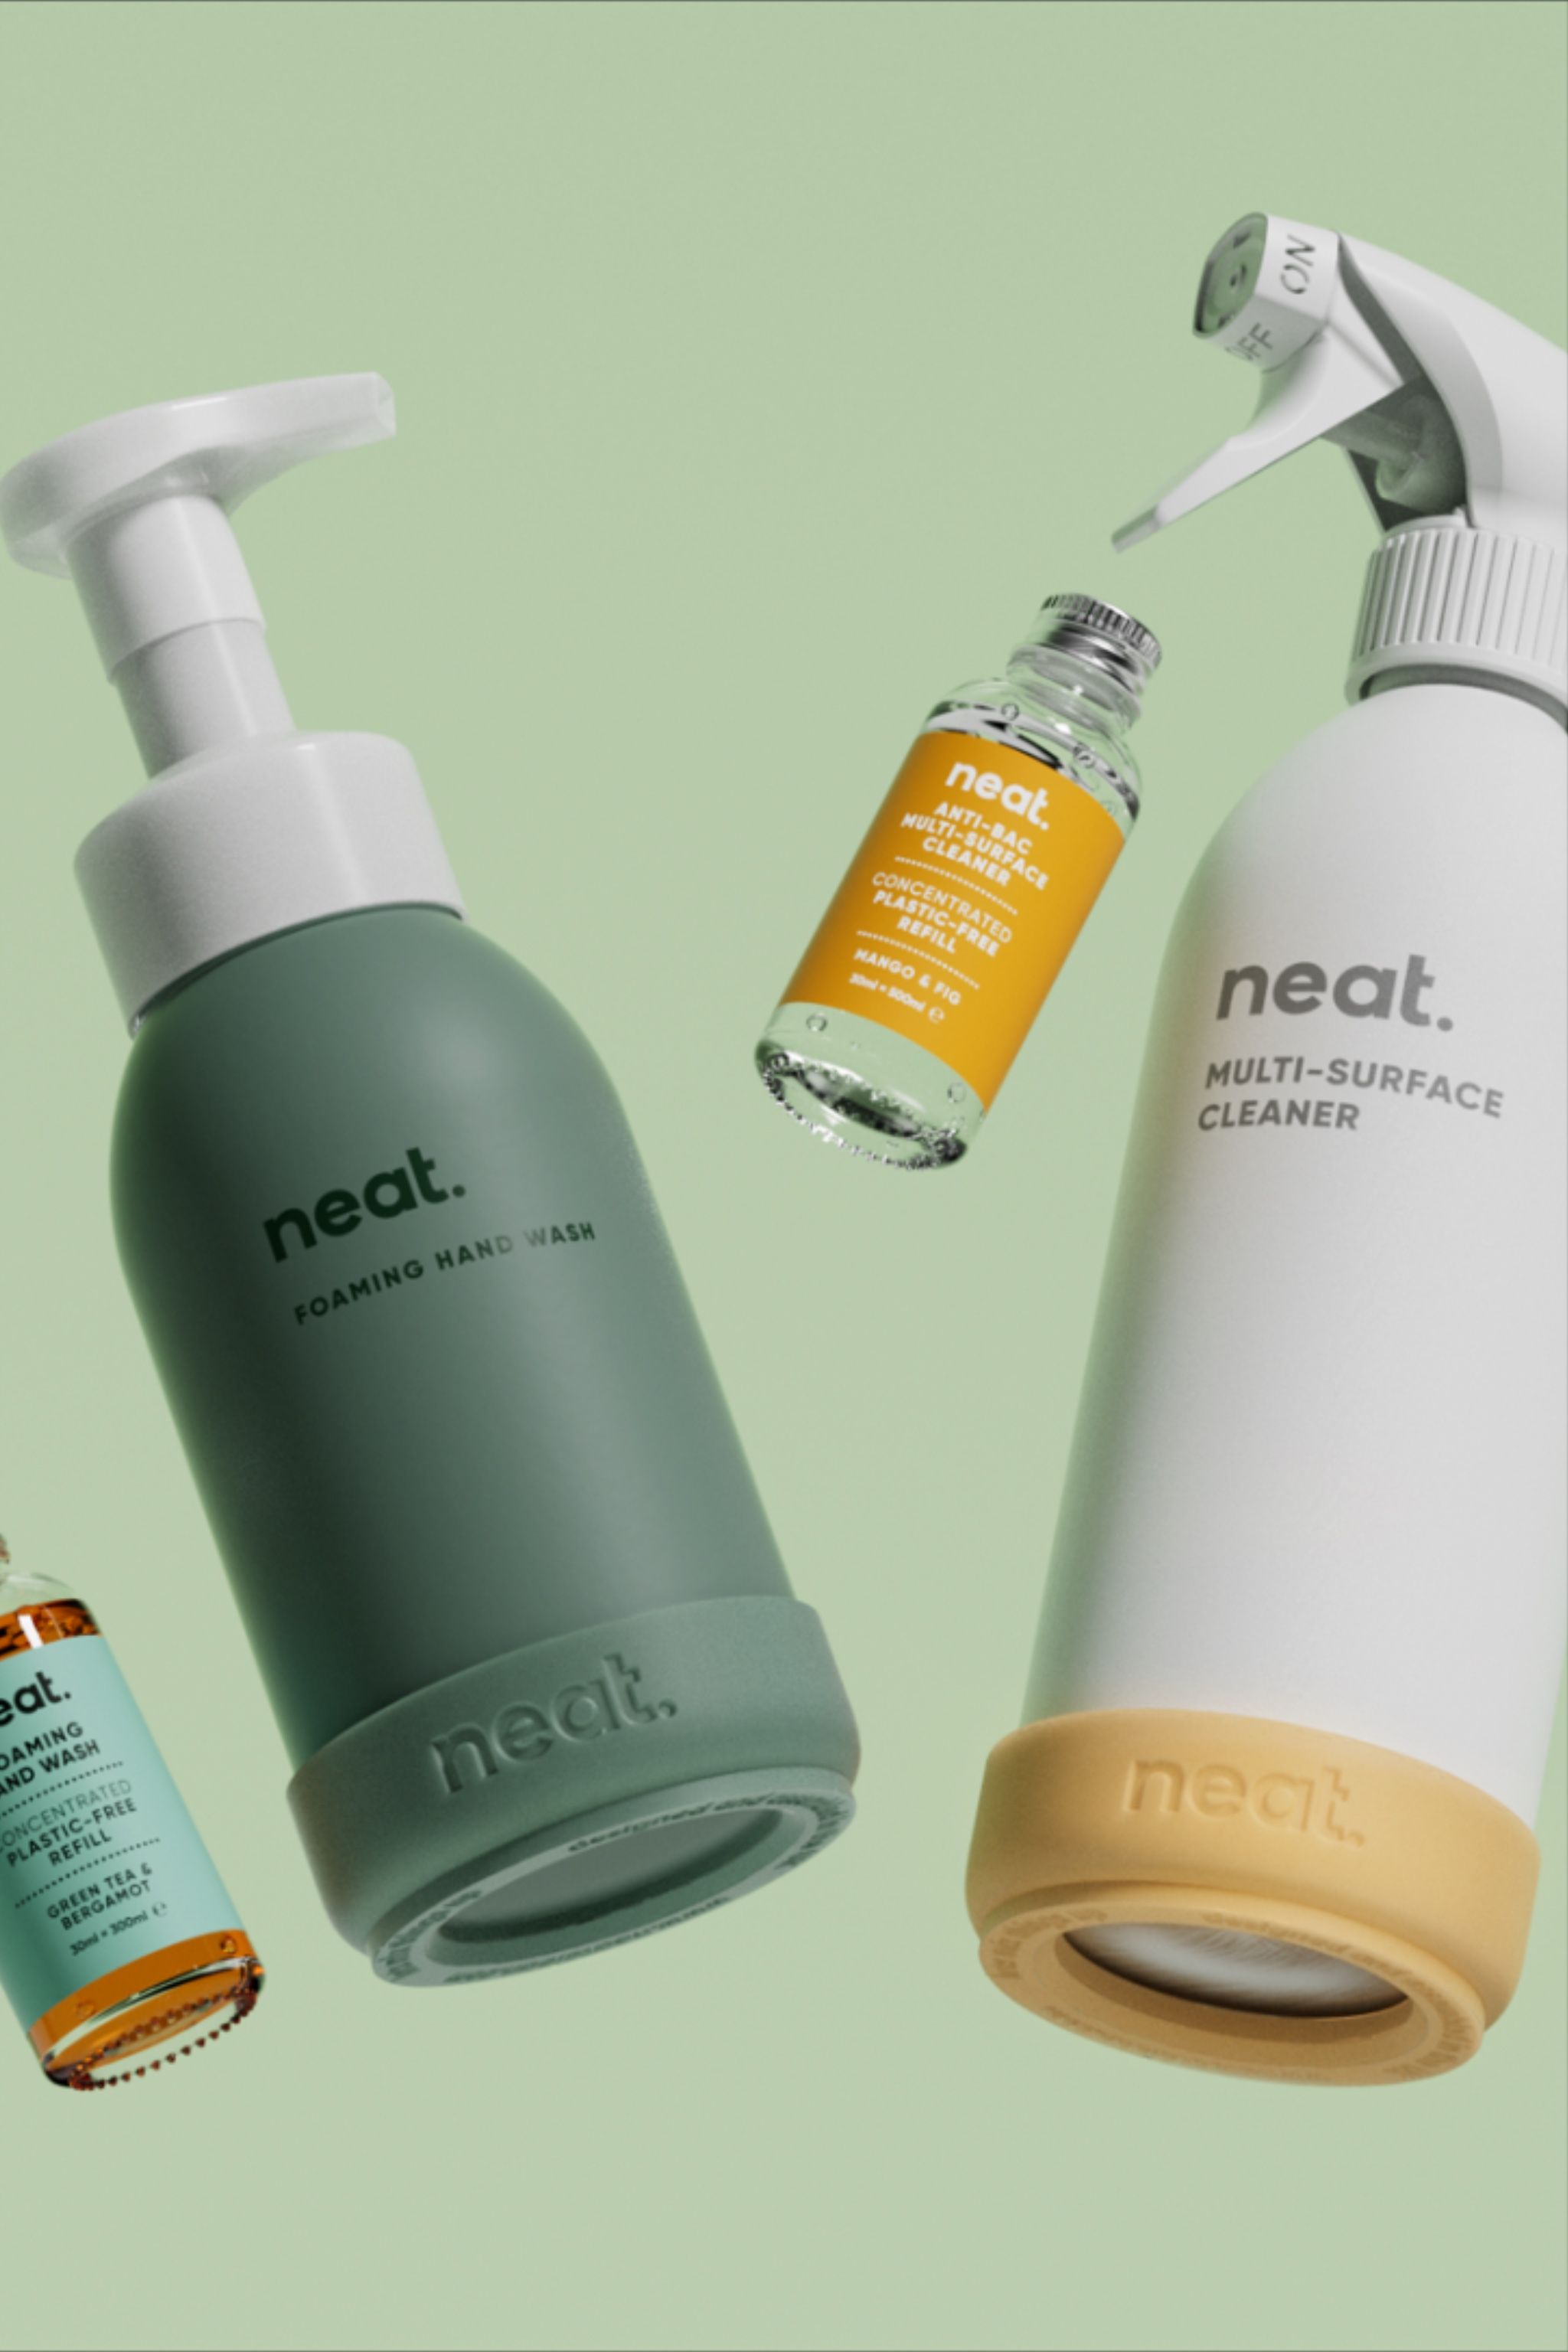 Neat Releases a Brand Refresh That’s Bolder and Even More Eco-Friendly